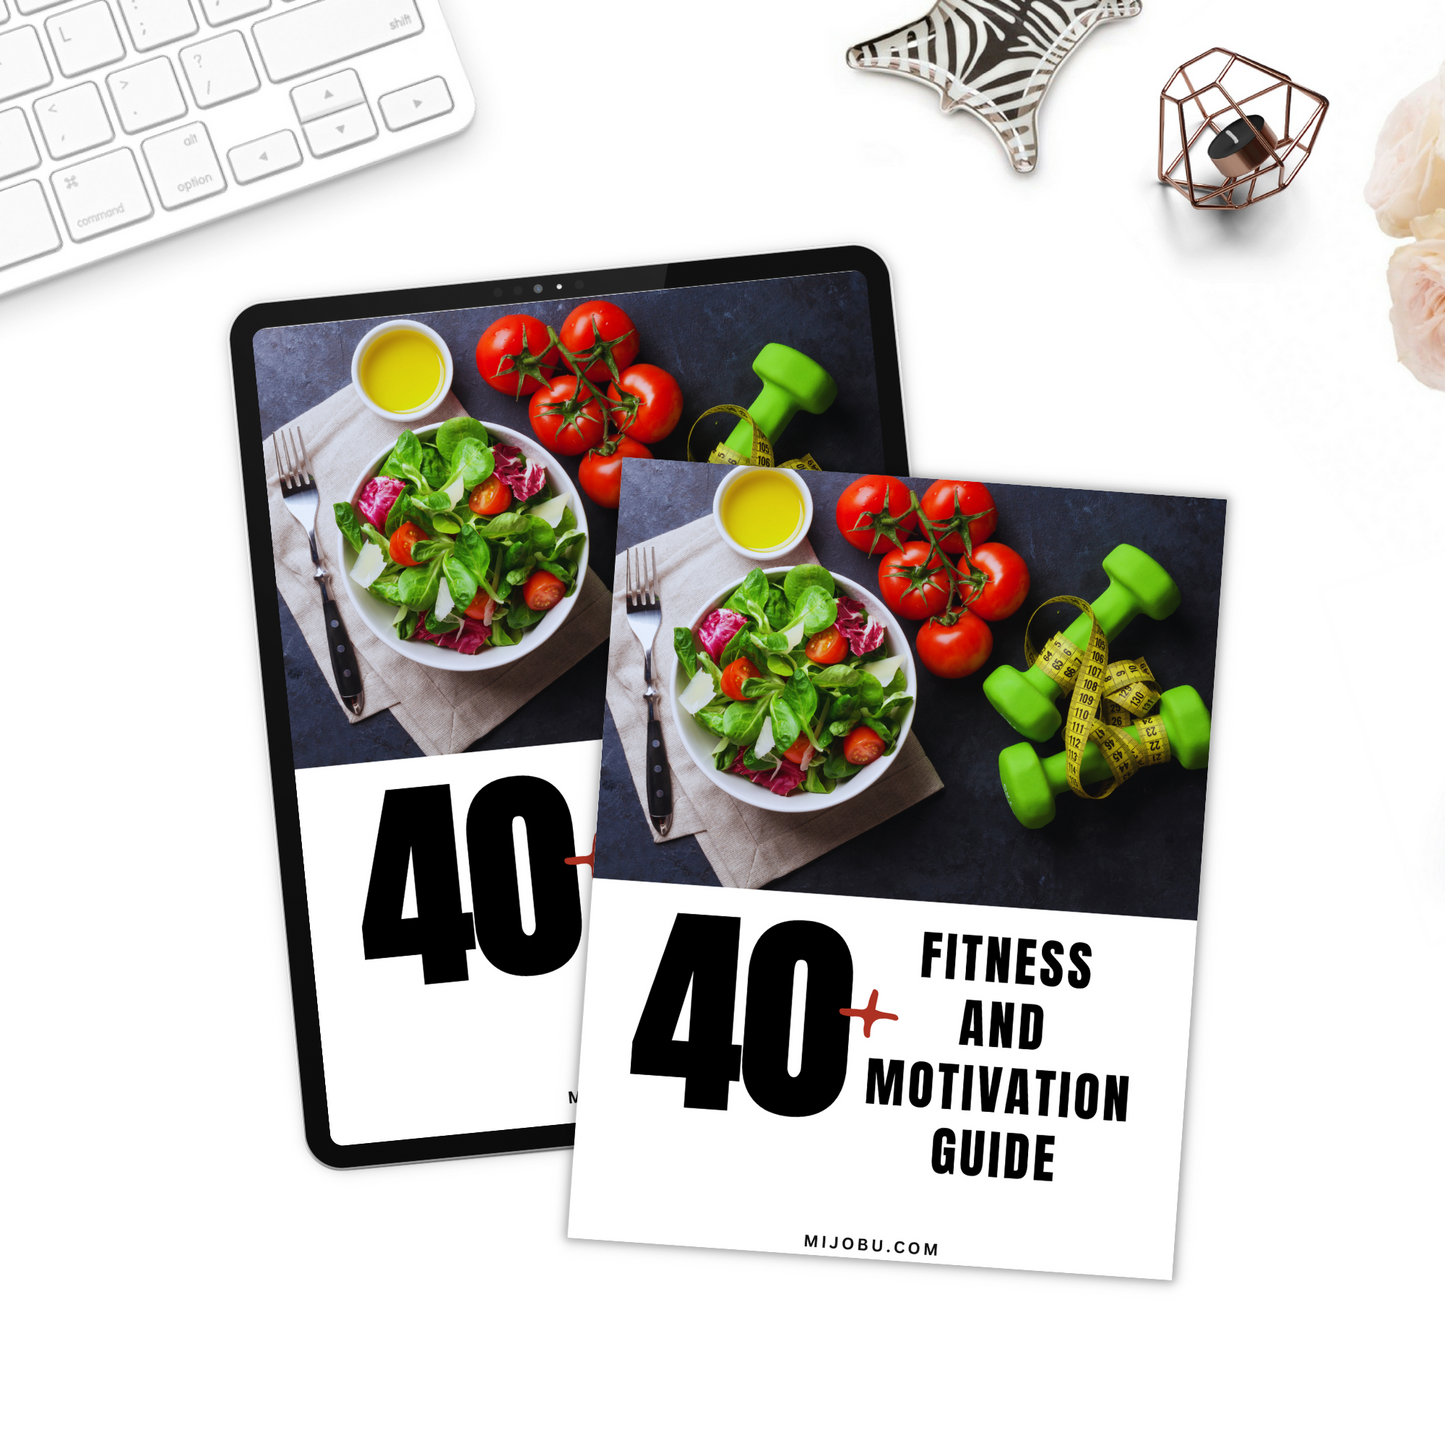 Fitness and Motivation Guide for Women 40 and Over - Instant Download - PDF File